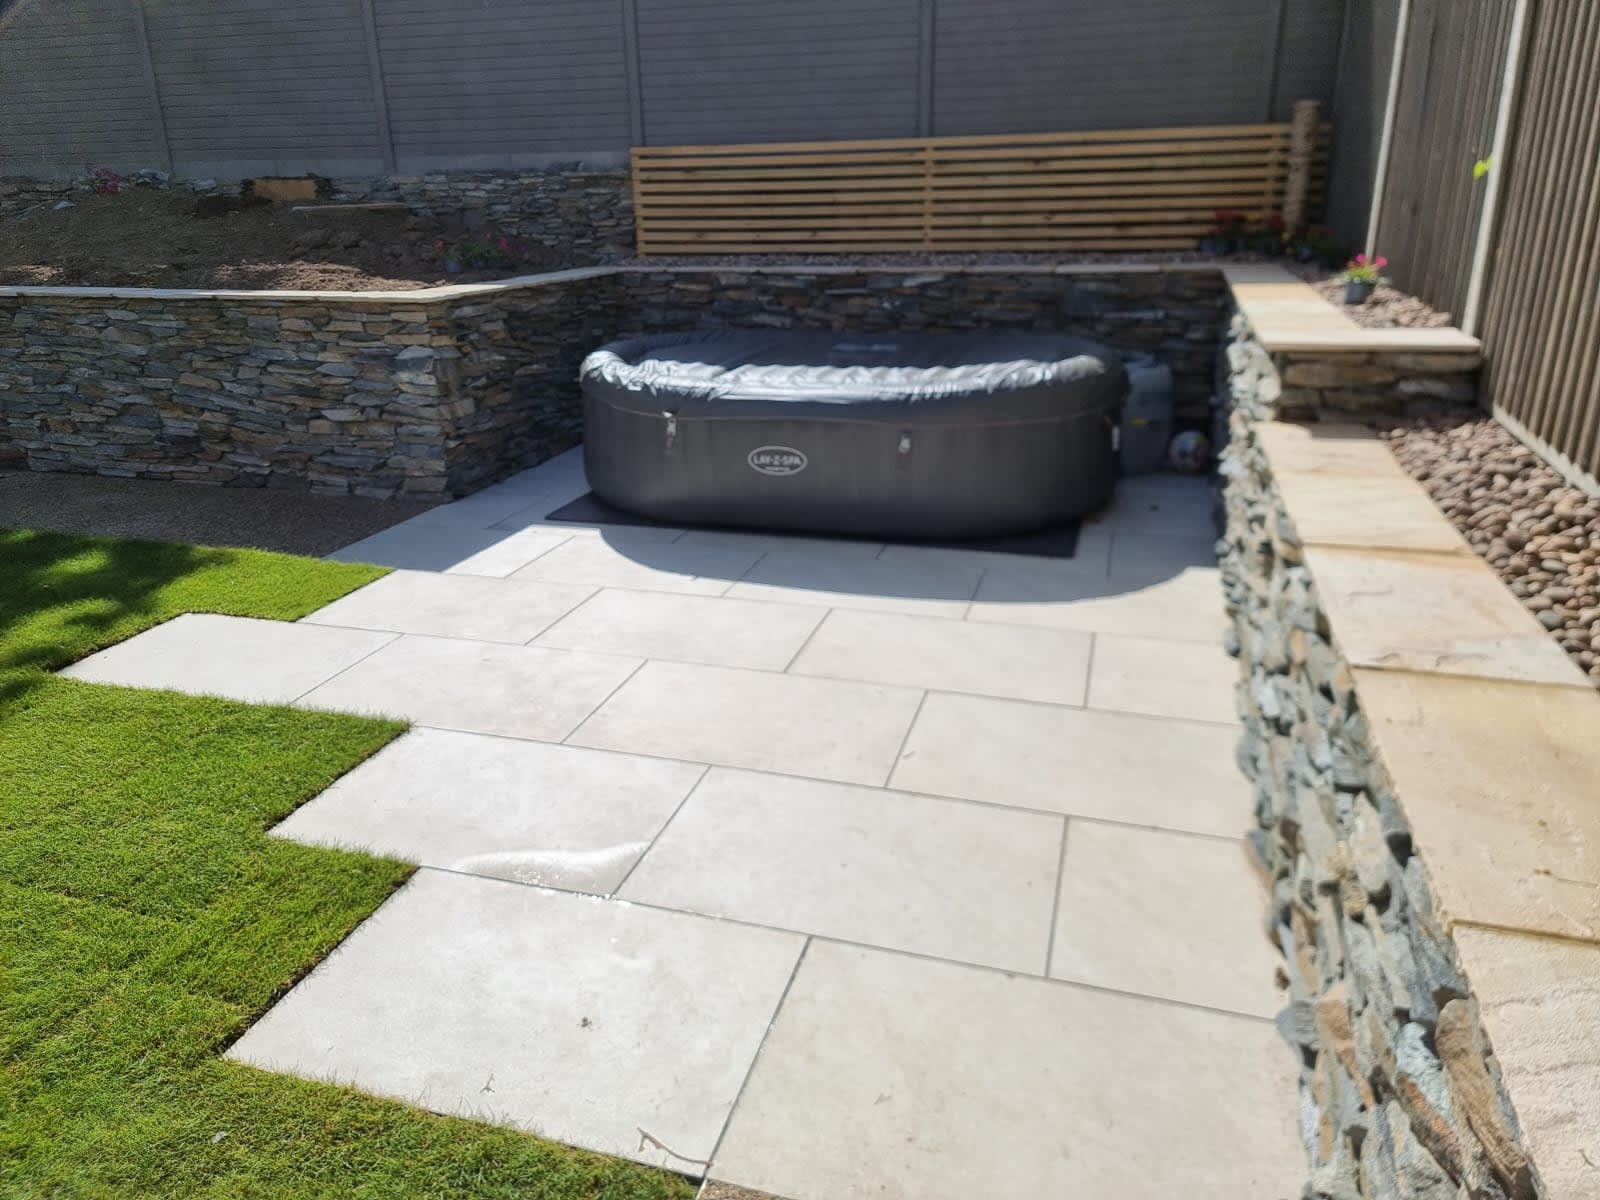 Images Infinite Landscaping & Groundworks